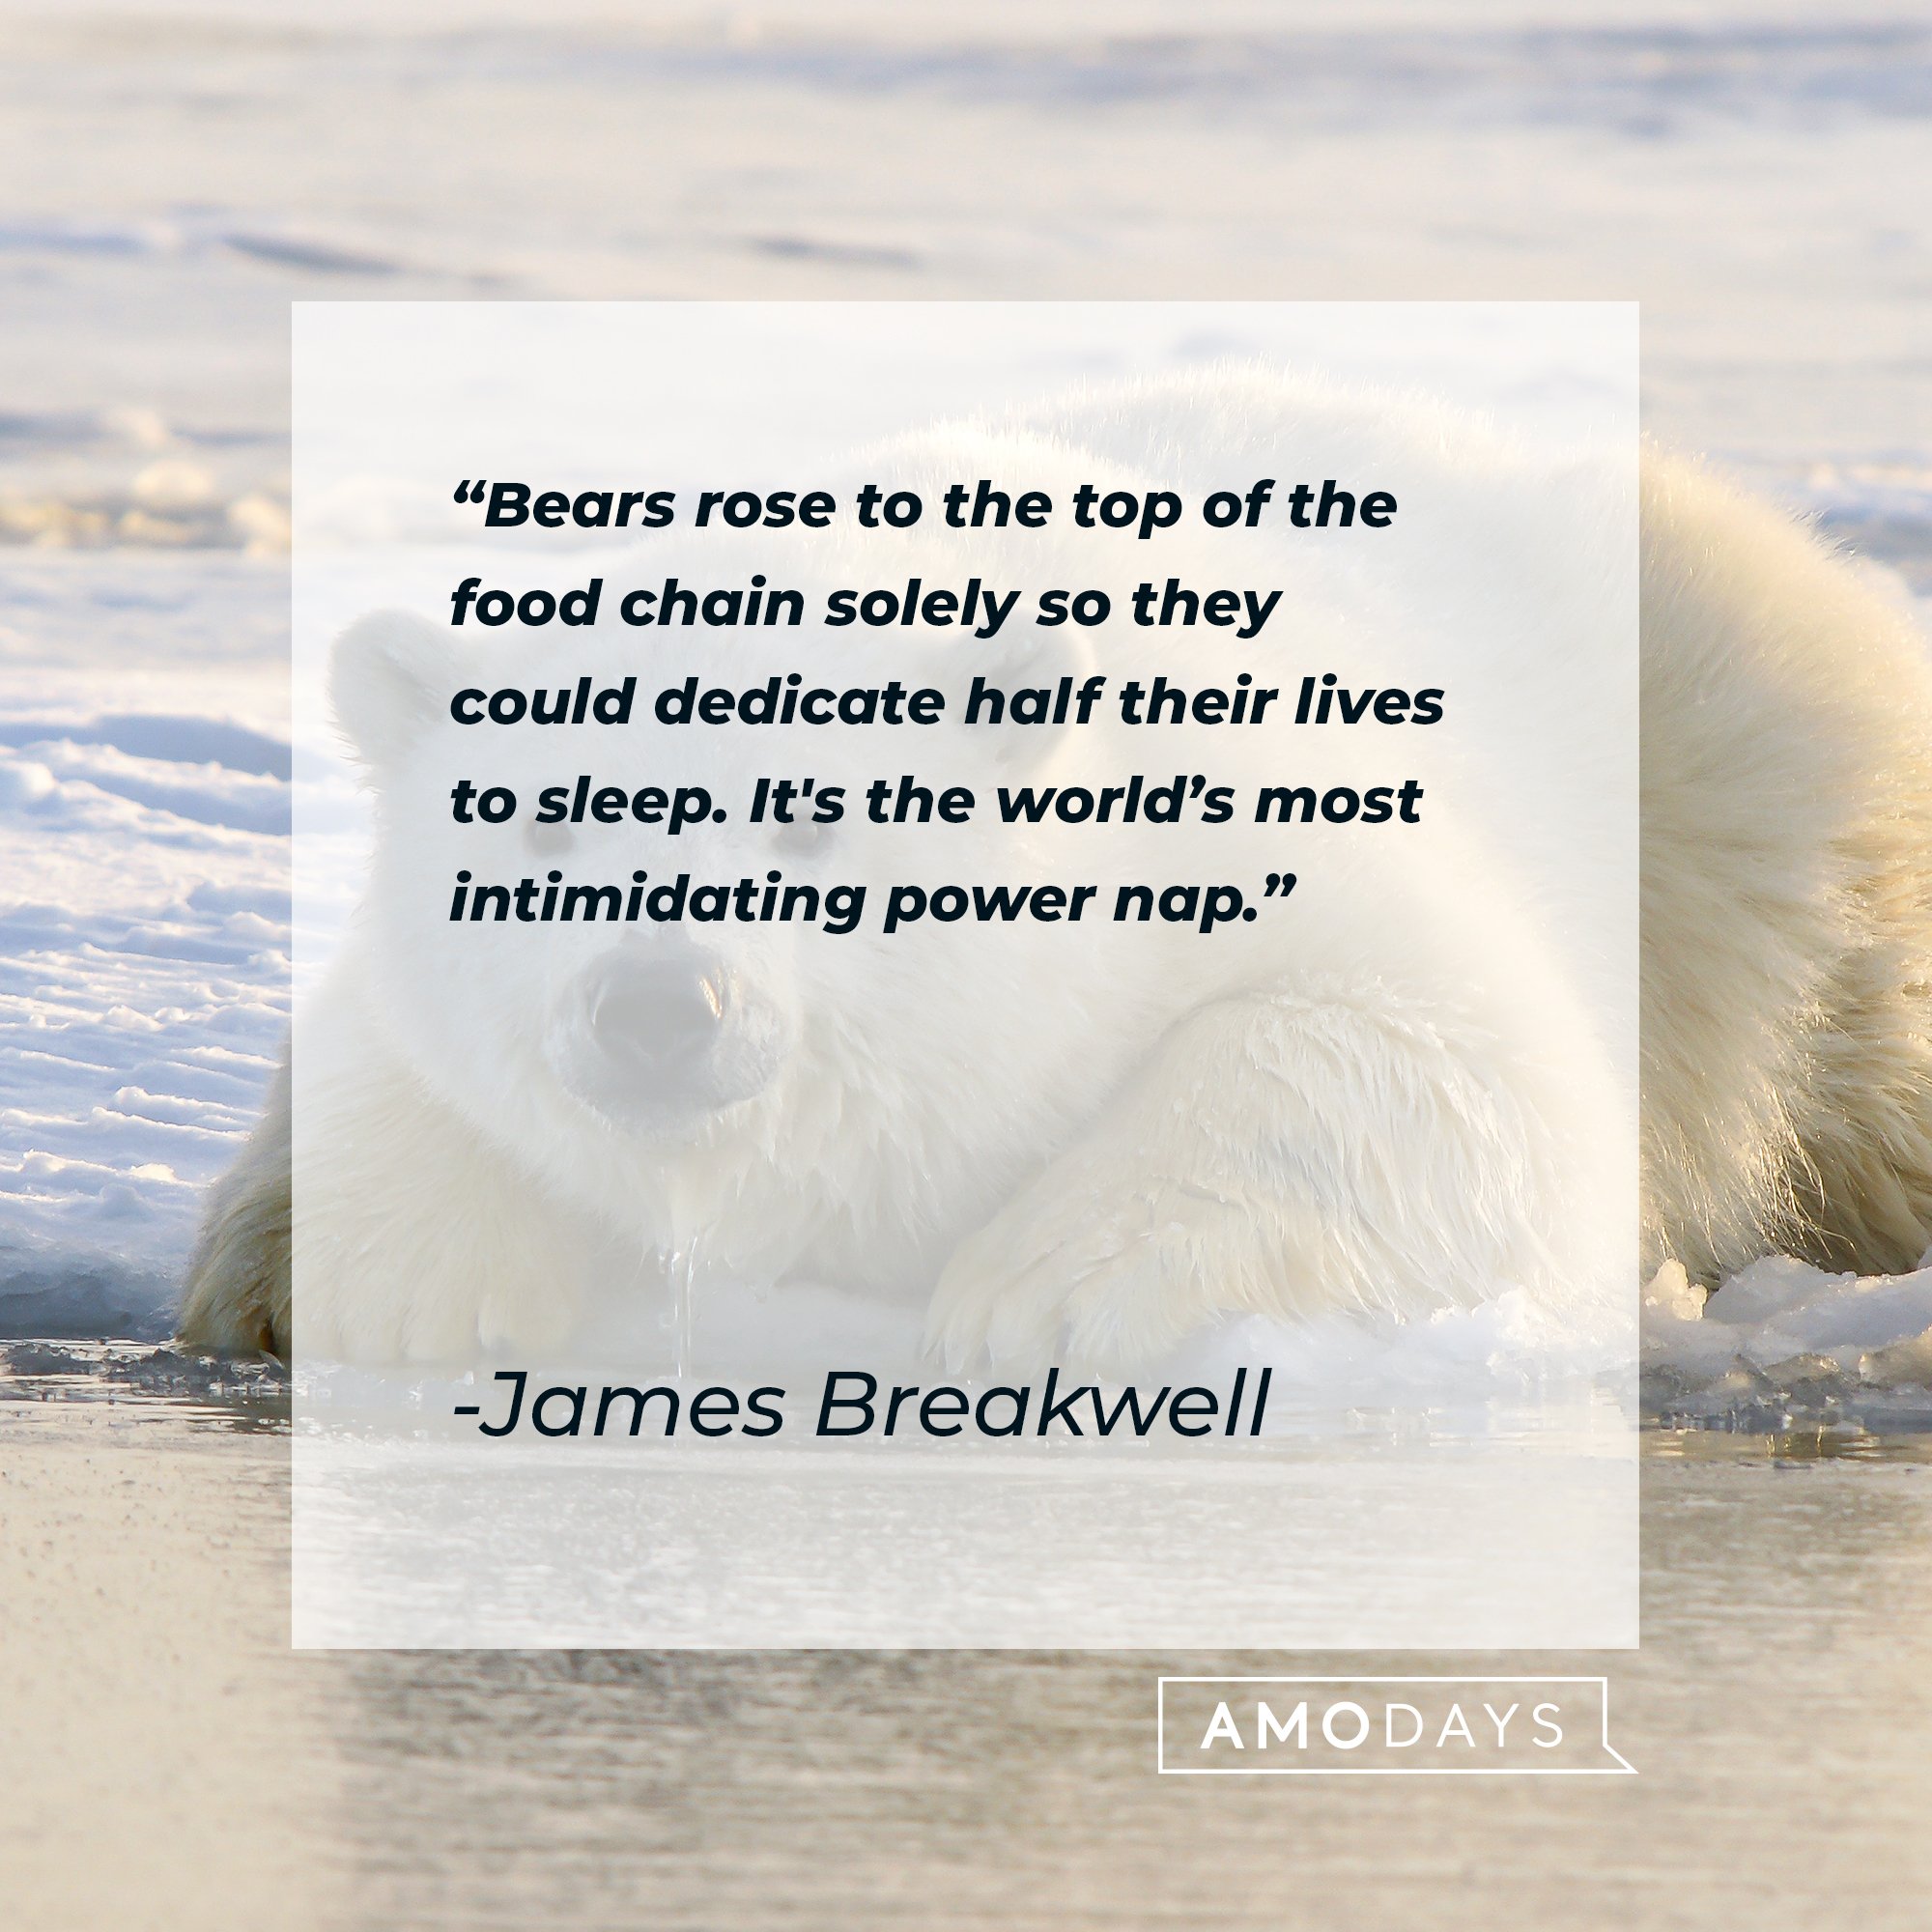 James Breakwell’s quote: "Bears rose to the top of the food chain solely so they could dedicate half their lives to sleep. It's the world's most intimidating power nap." | Image: AmoDays